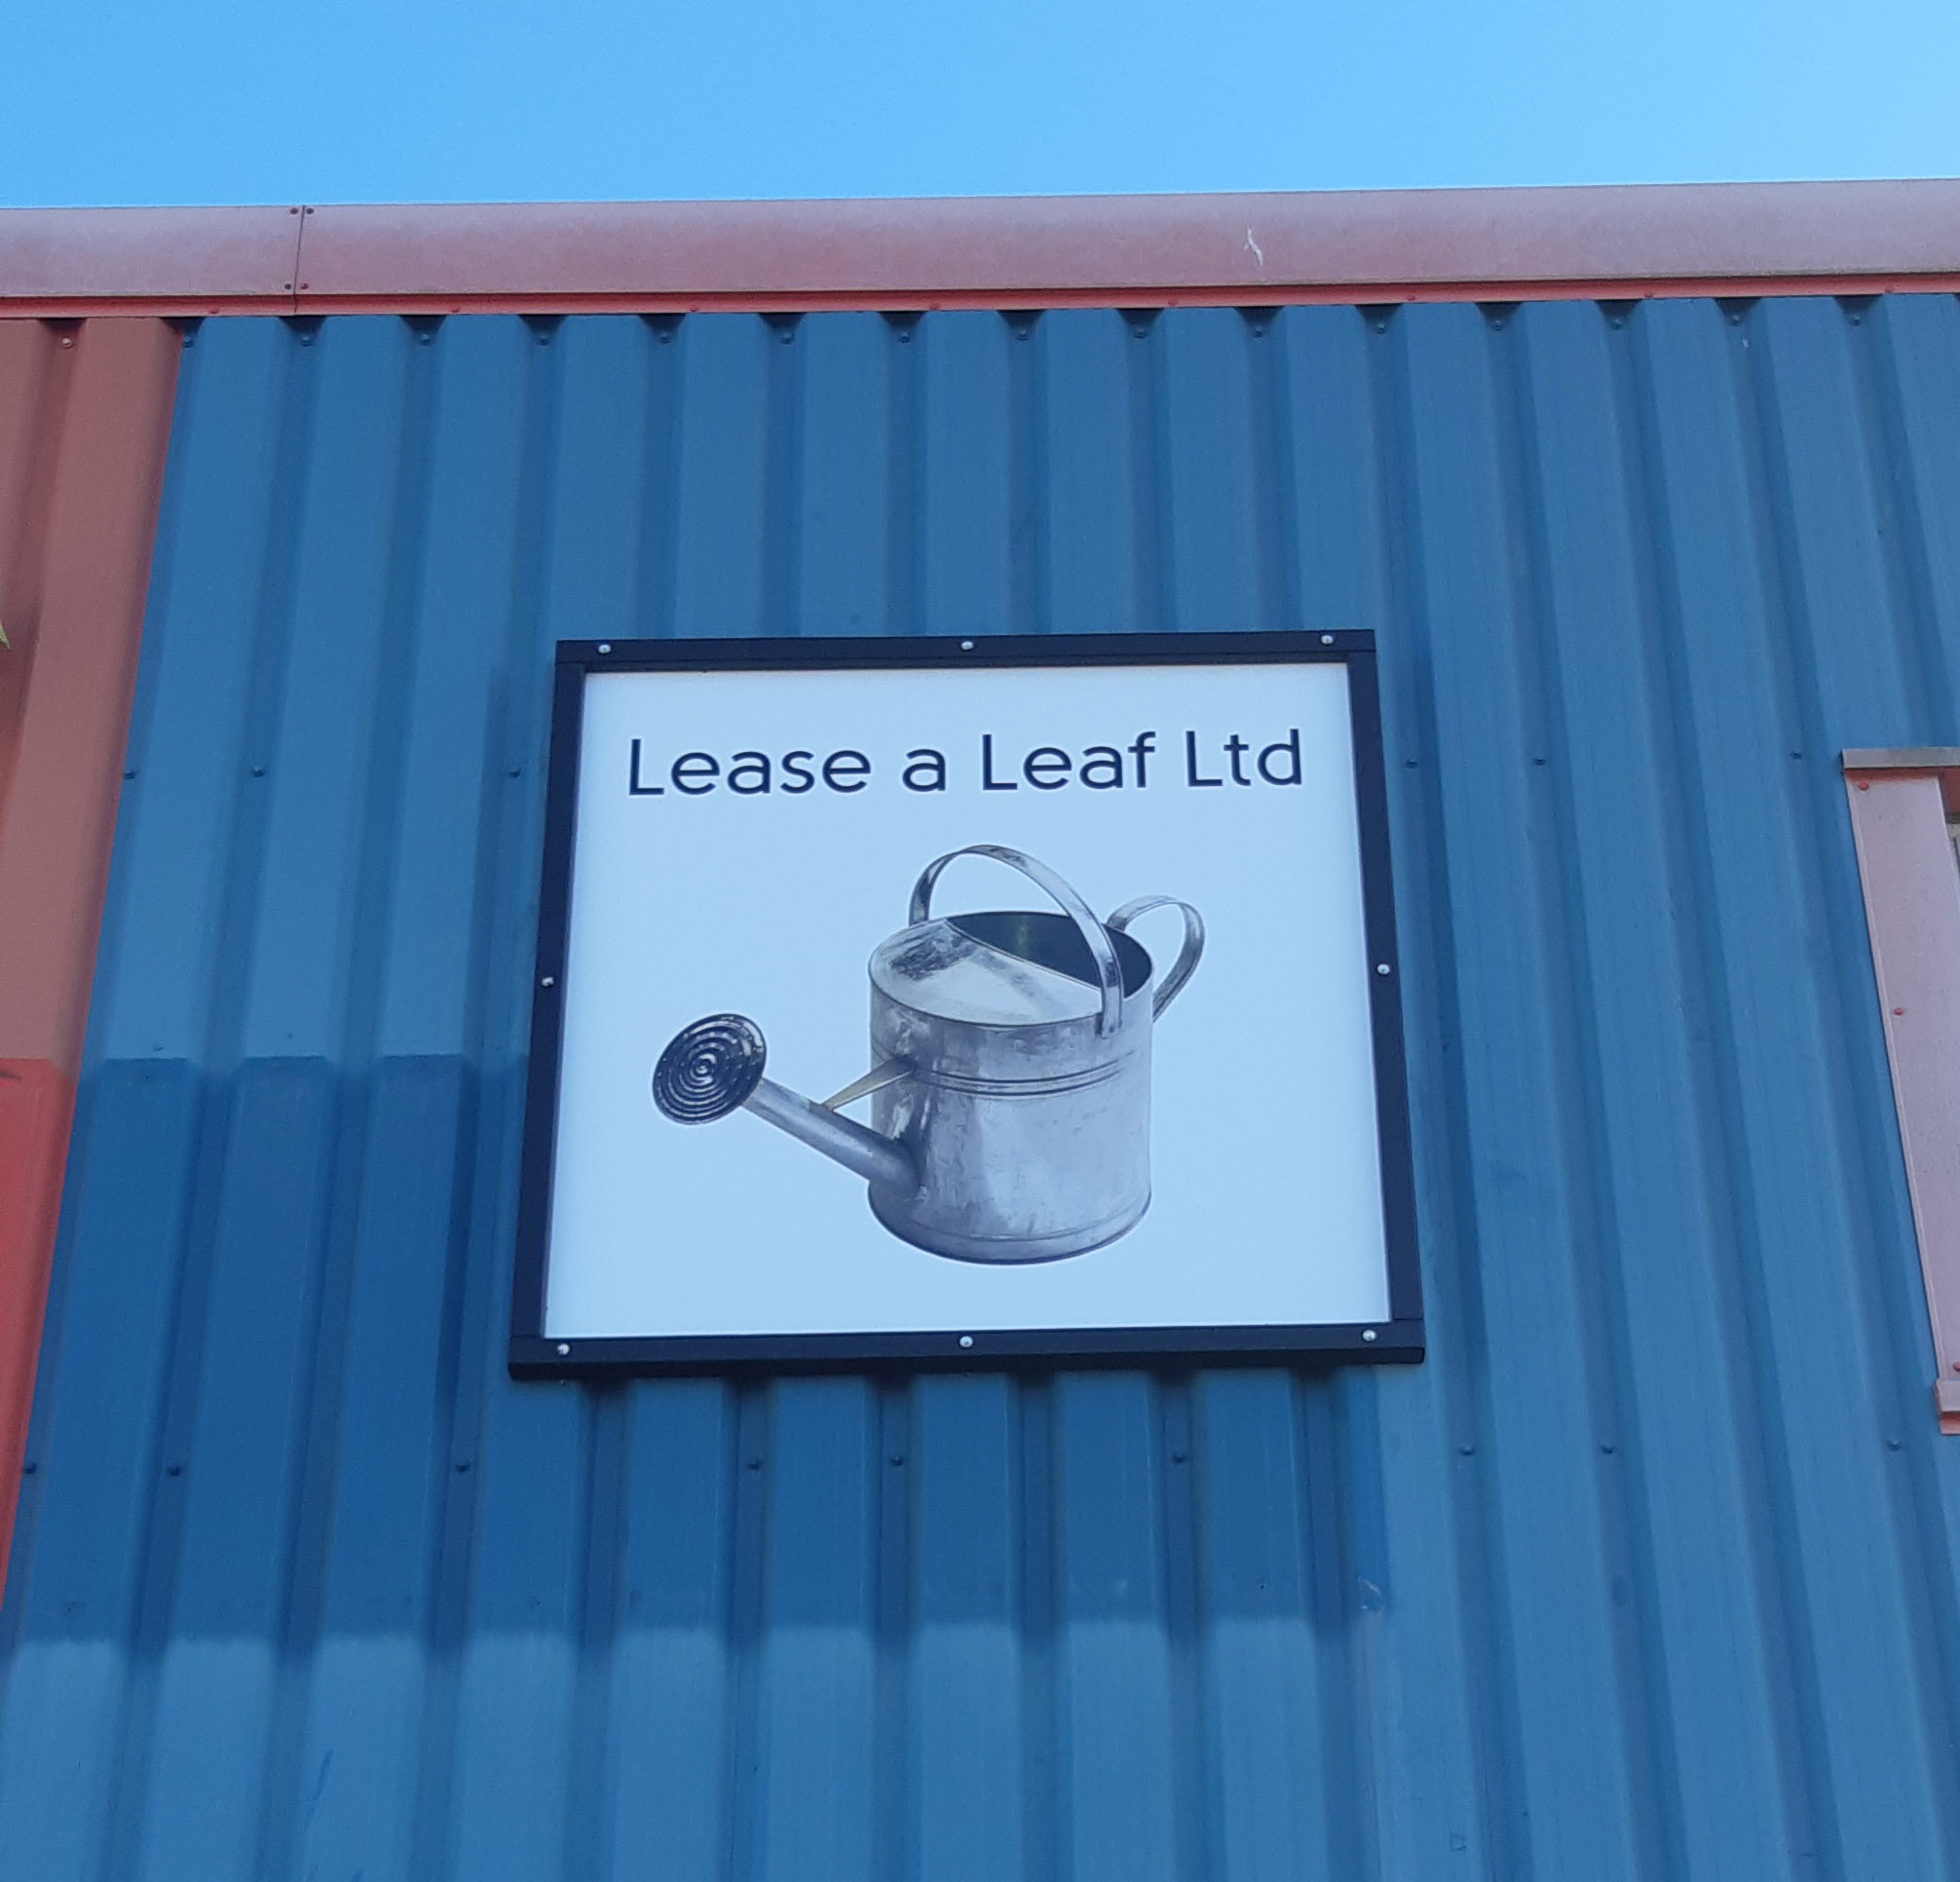 Lease-A-Leaf-Sign1